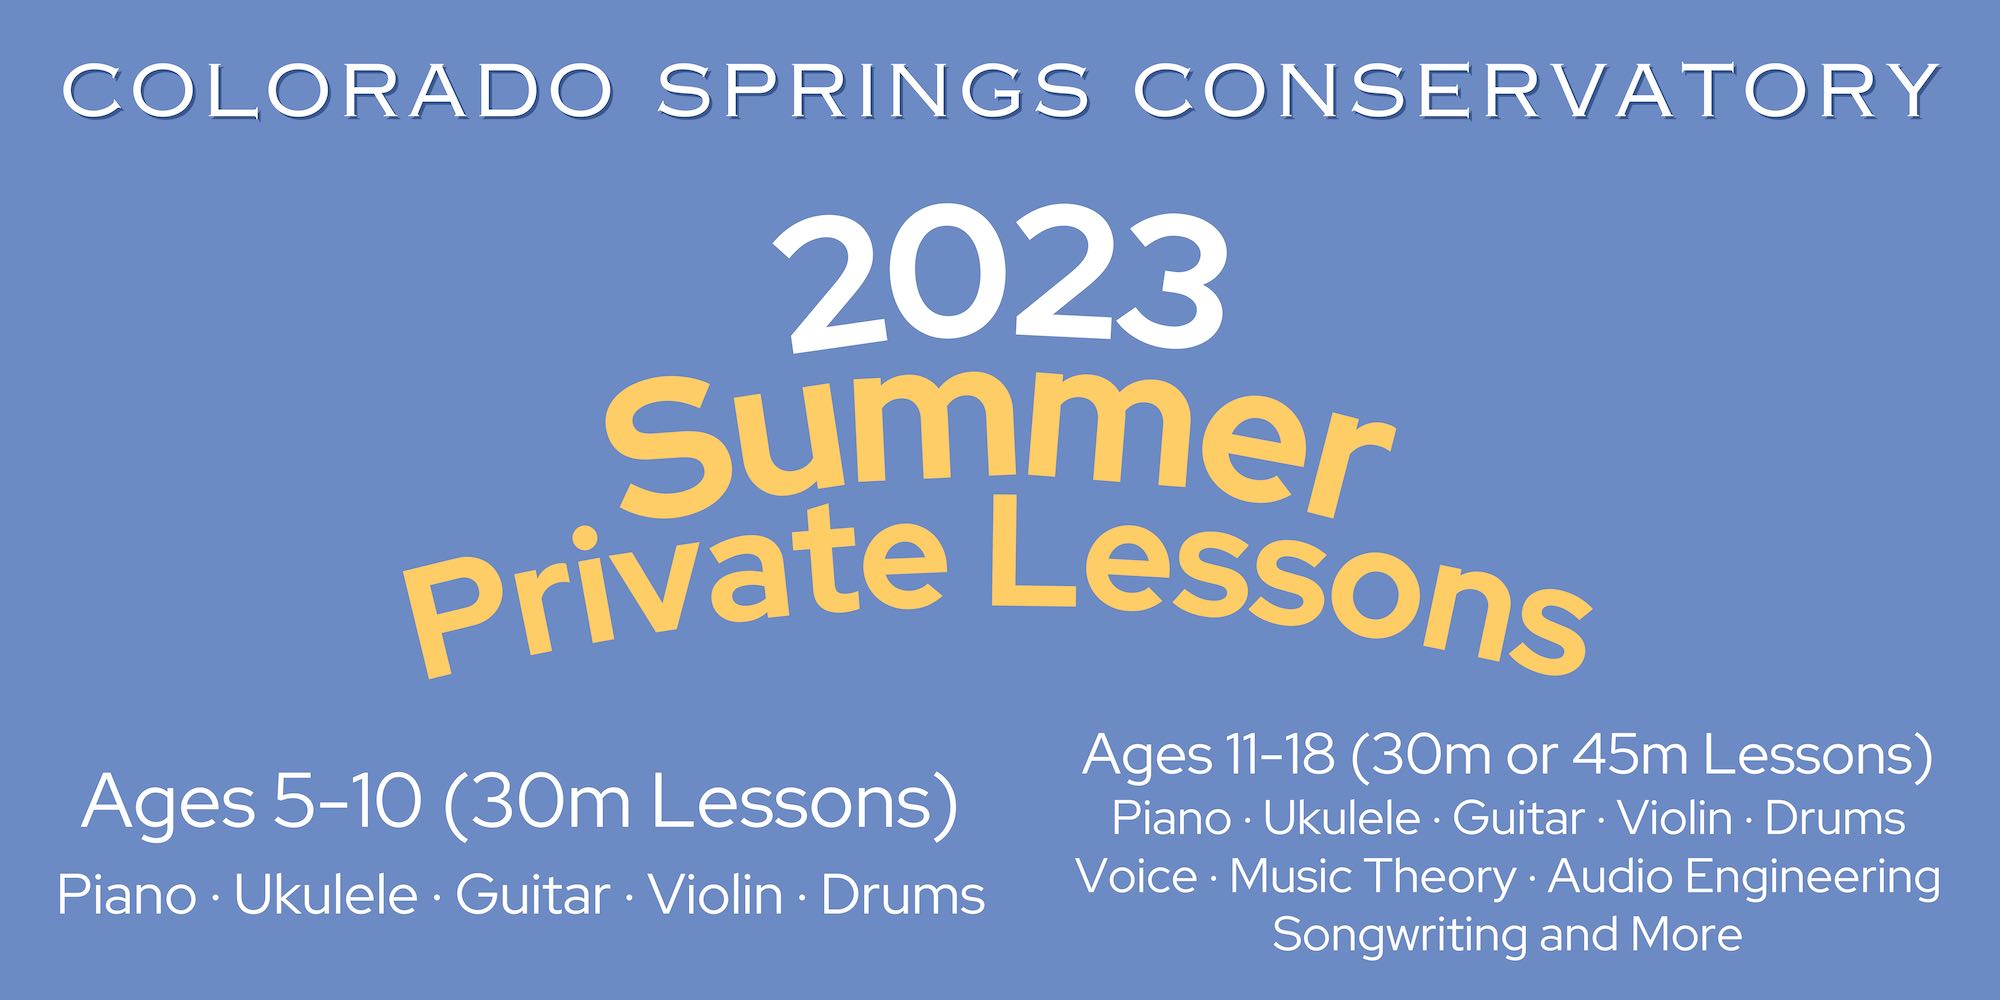 2023 summer private music lessons in Colorado Springs